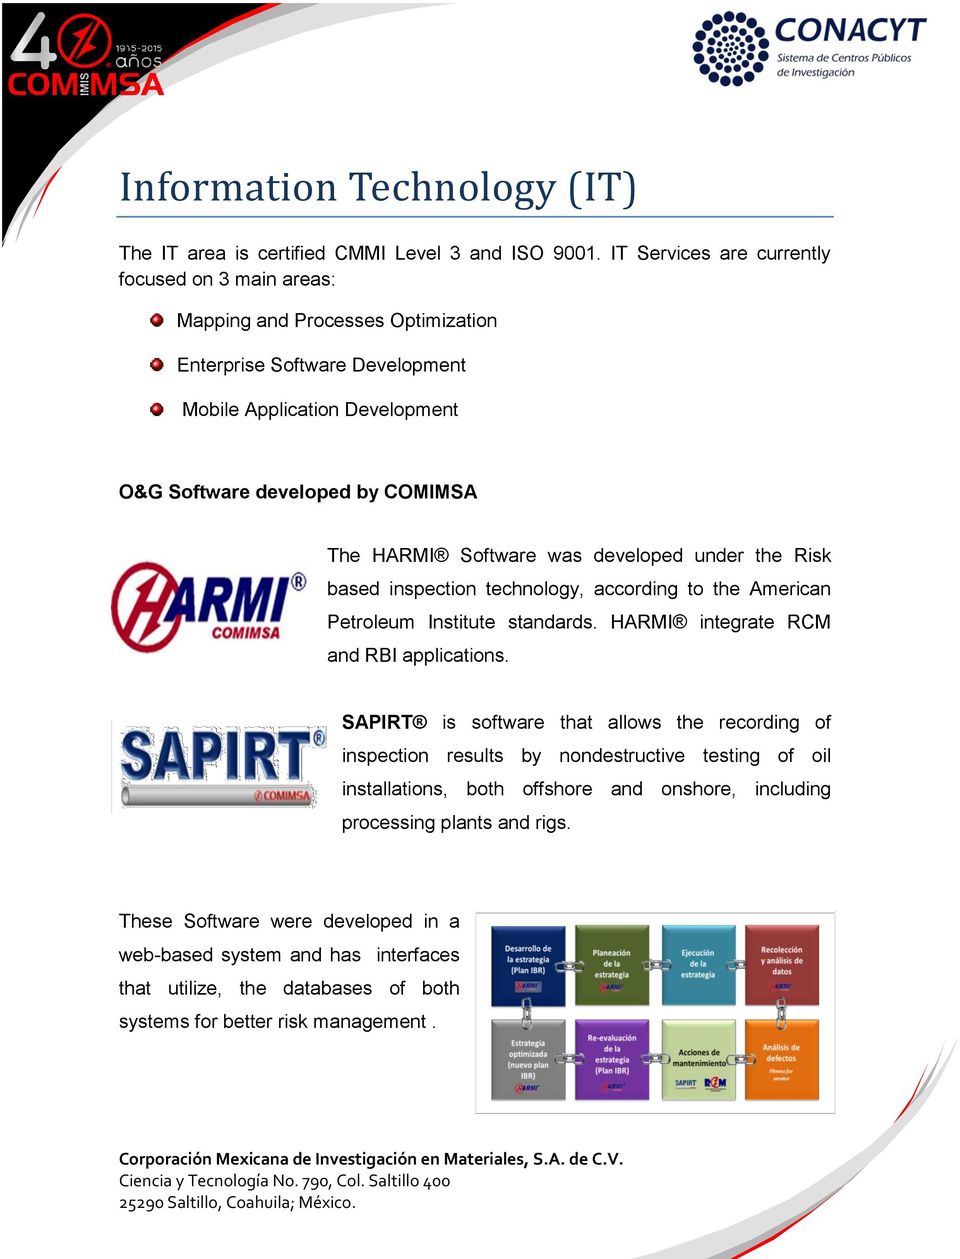 HARMI Software was developed under the Risk based inspection technology, according to the American Petroleum Institute standards. HARMI integrate RCM and RBI applications.